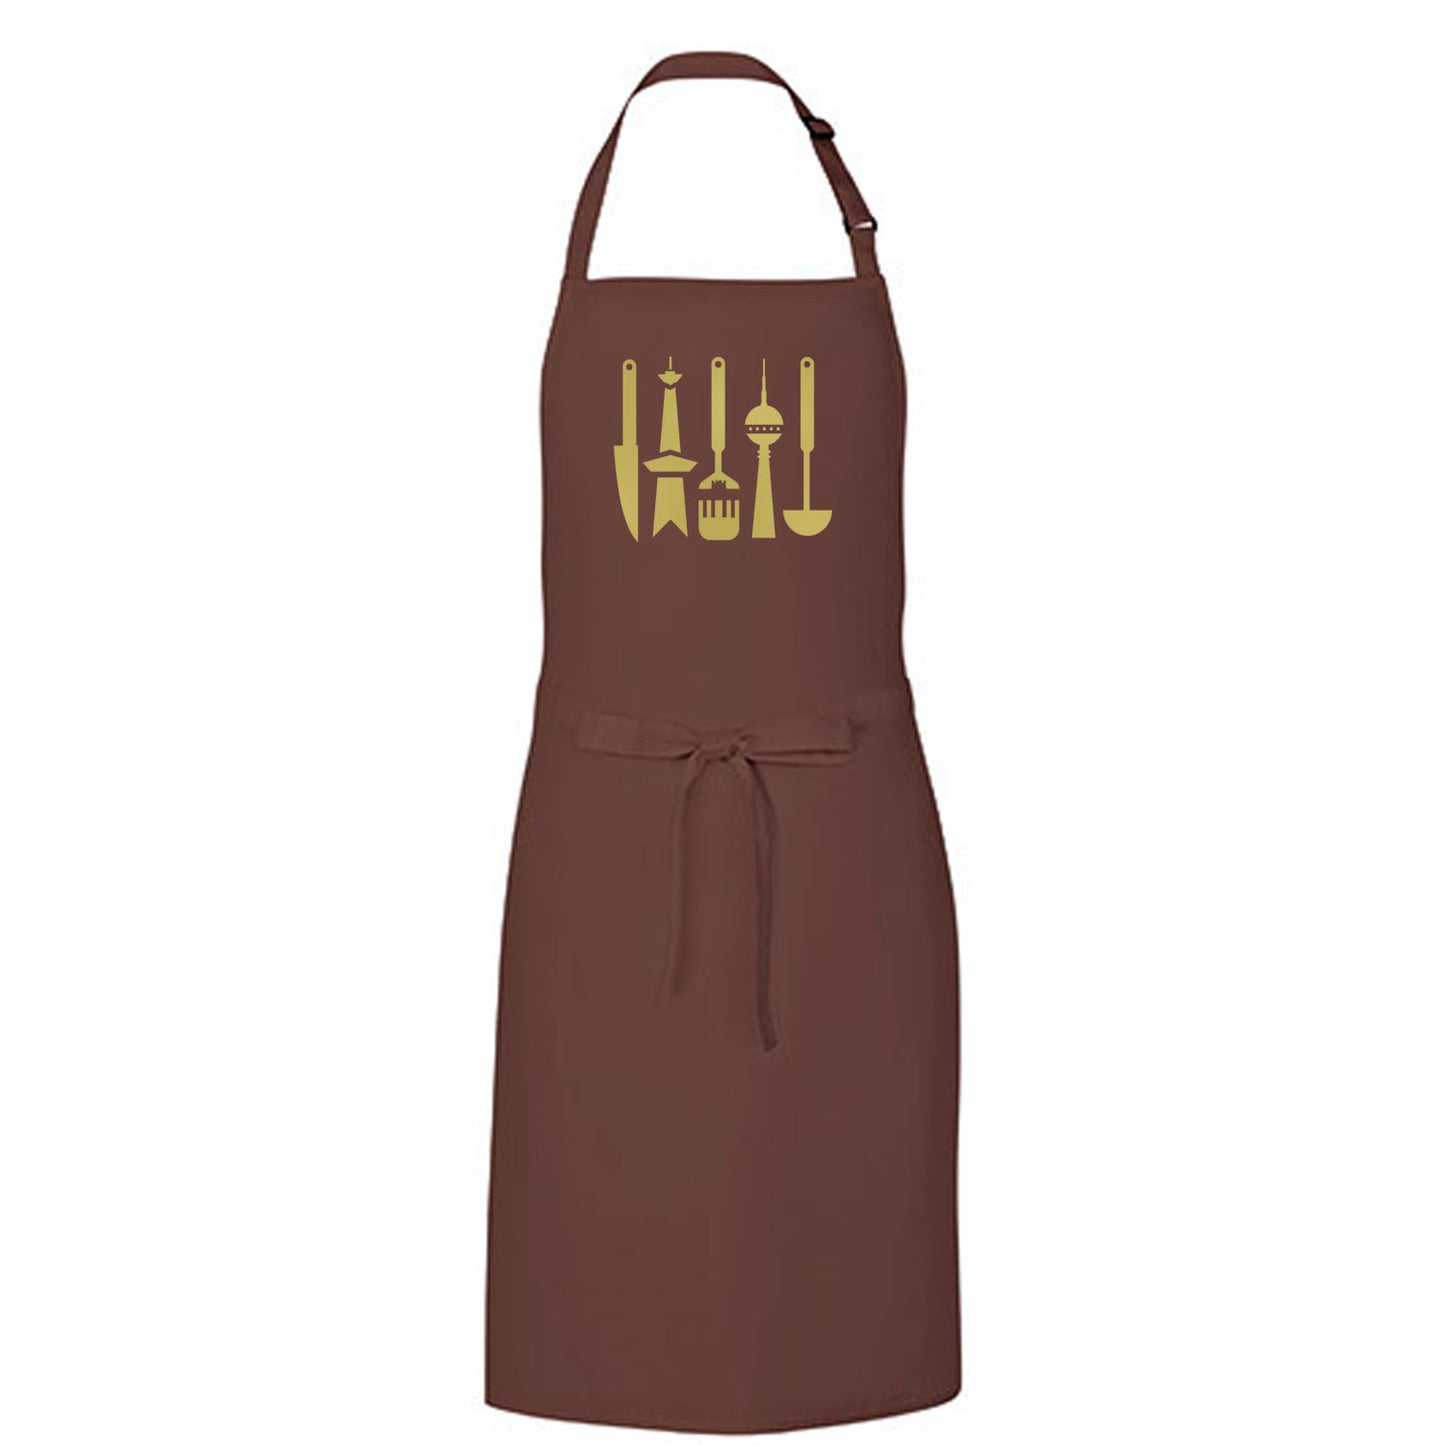 Cooking apron: Berlin kitchen